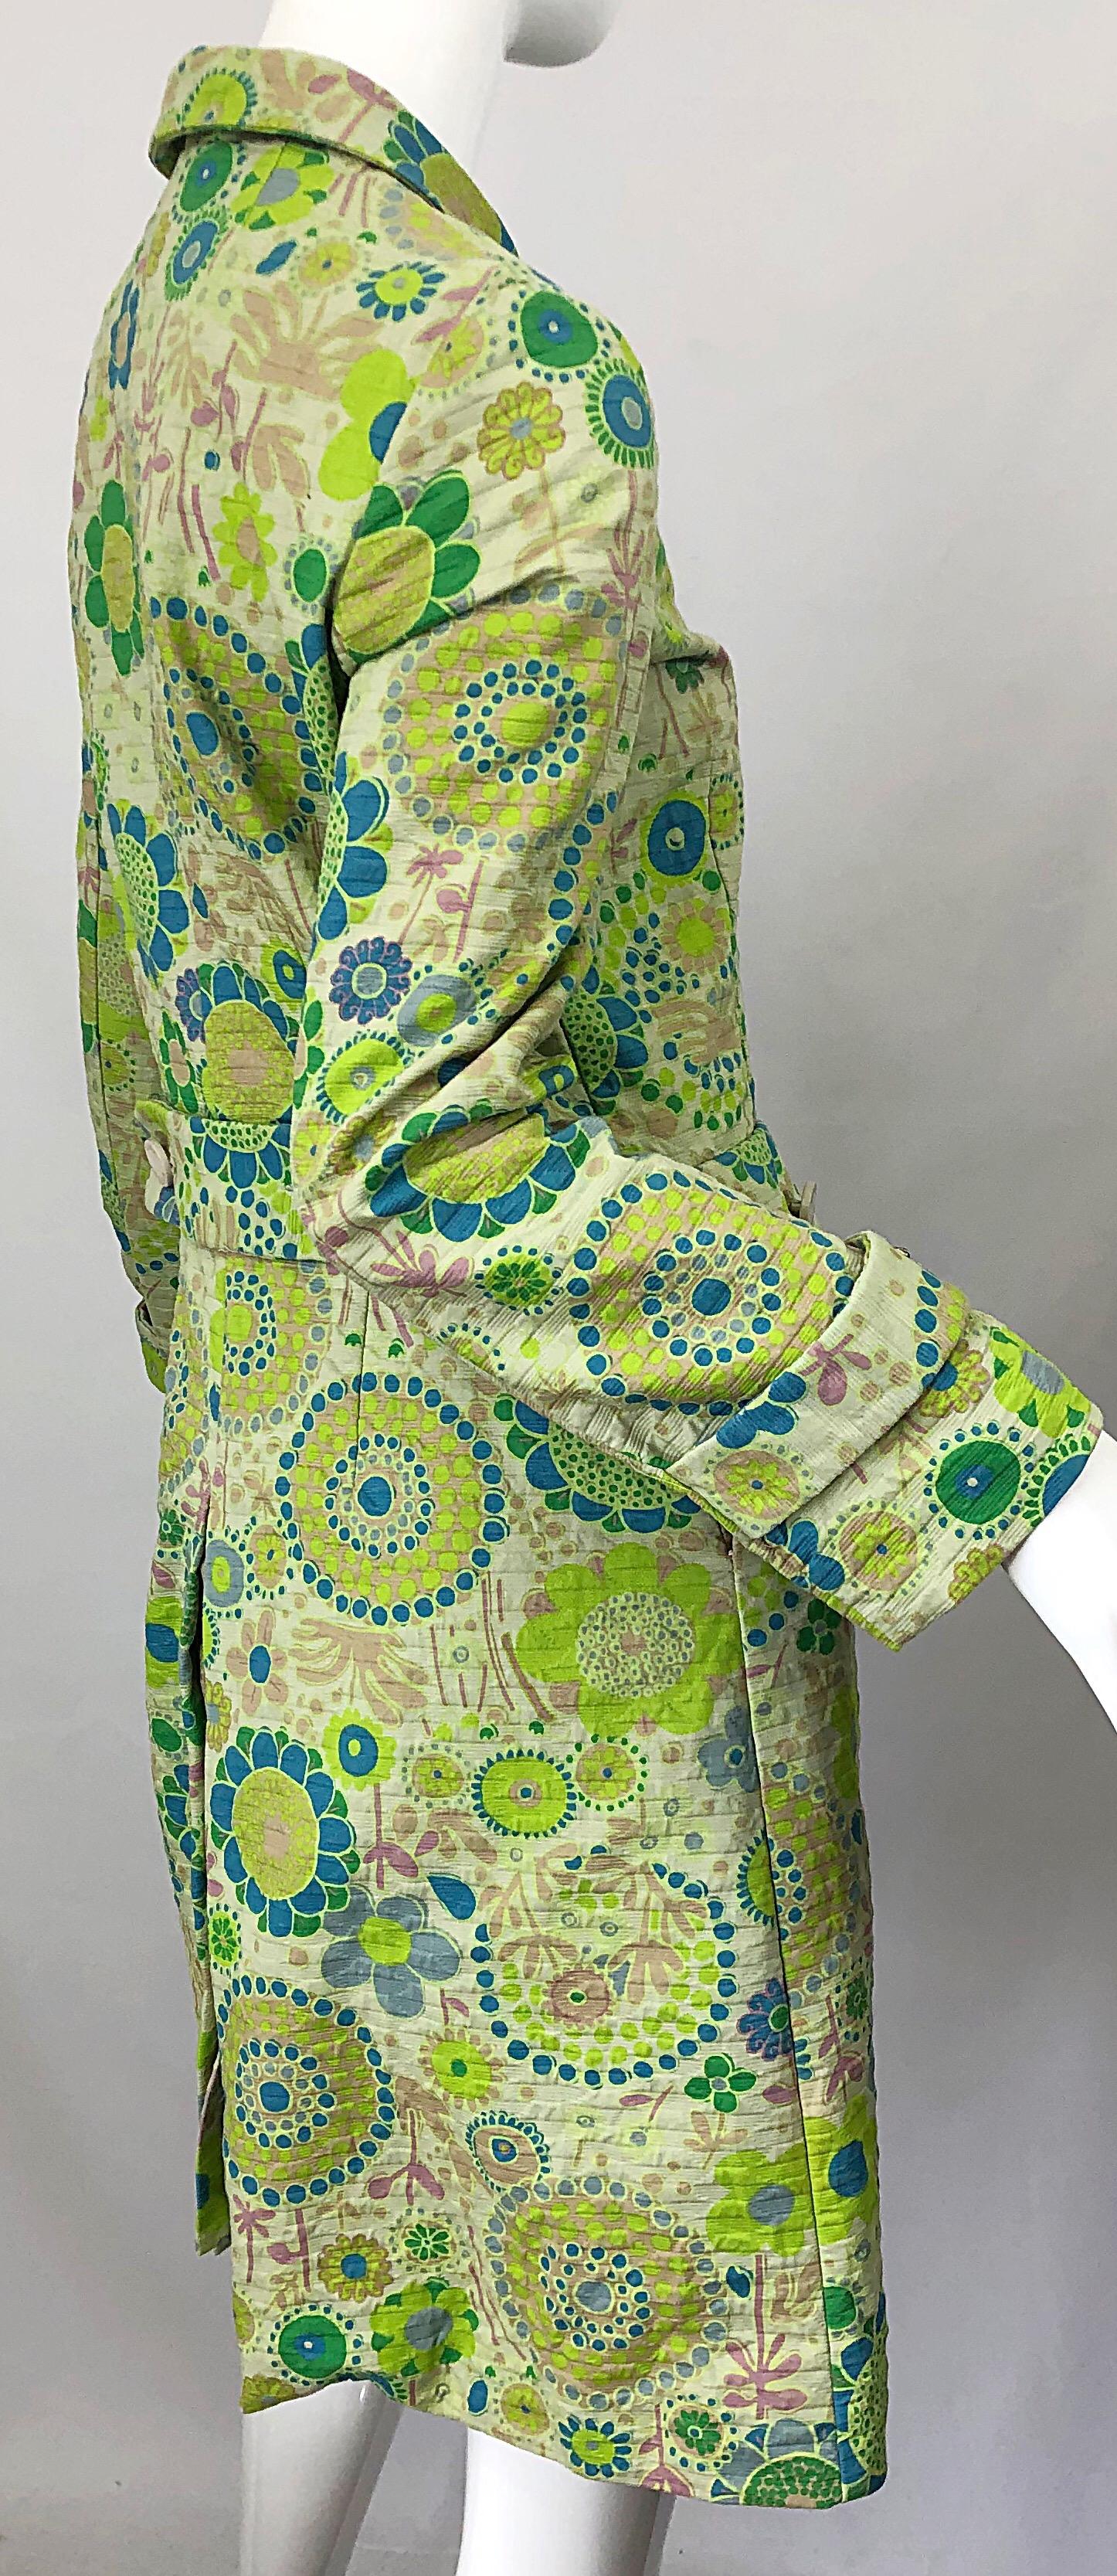 Marc Jacobs Collection Neon Green Blue Rhinestone Mod 60s Style Cotton Jacket For Sale 6